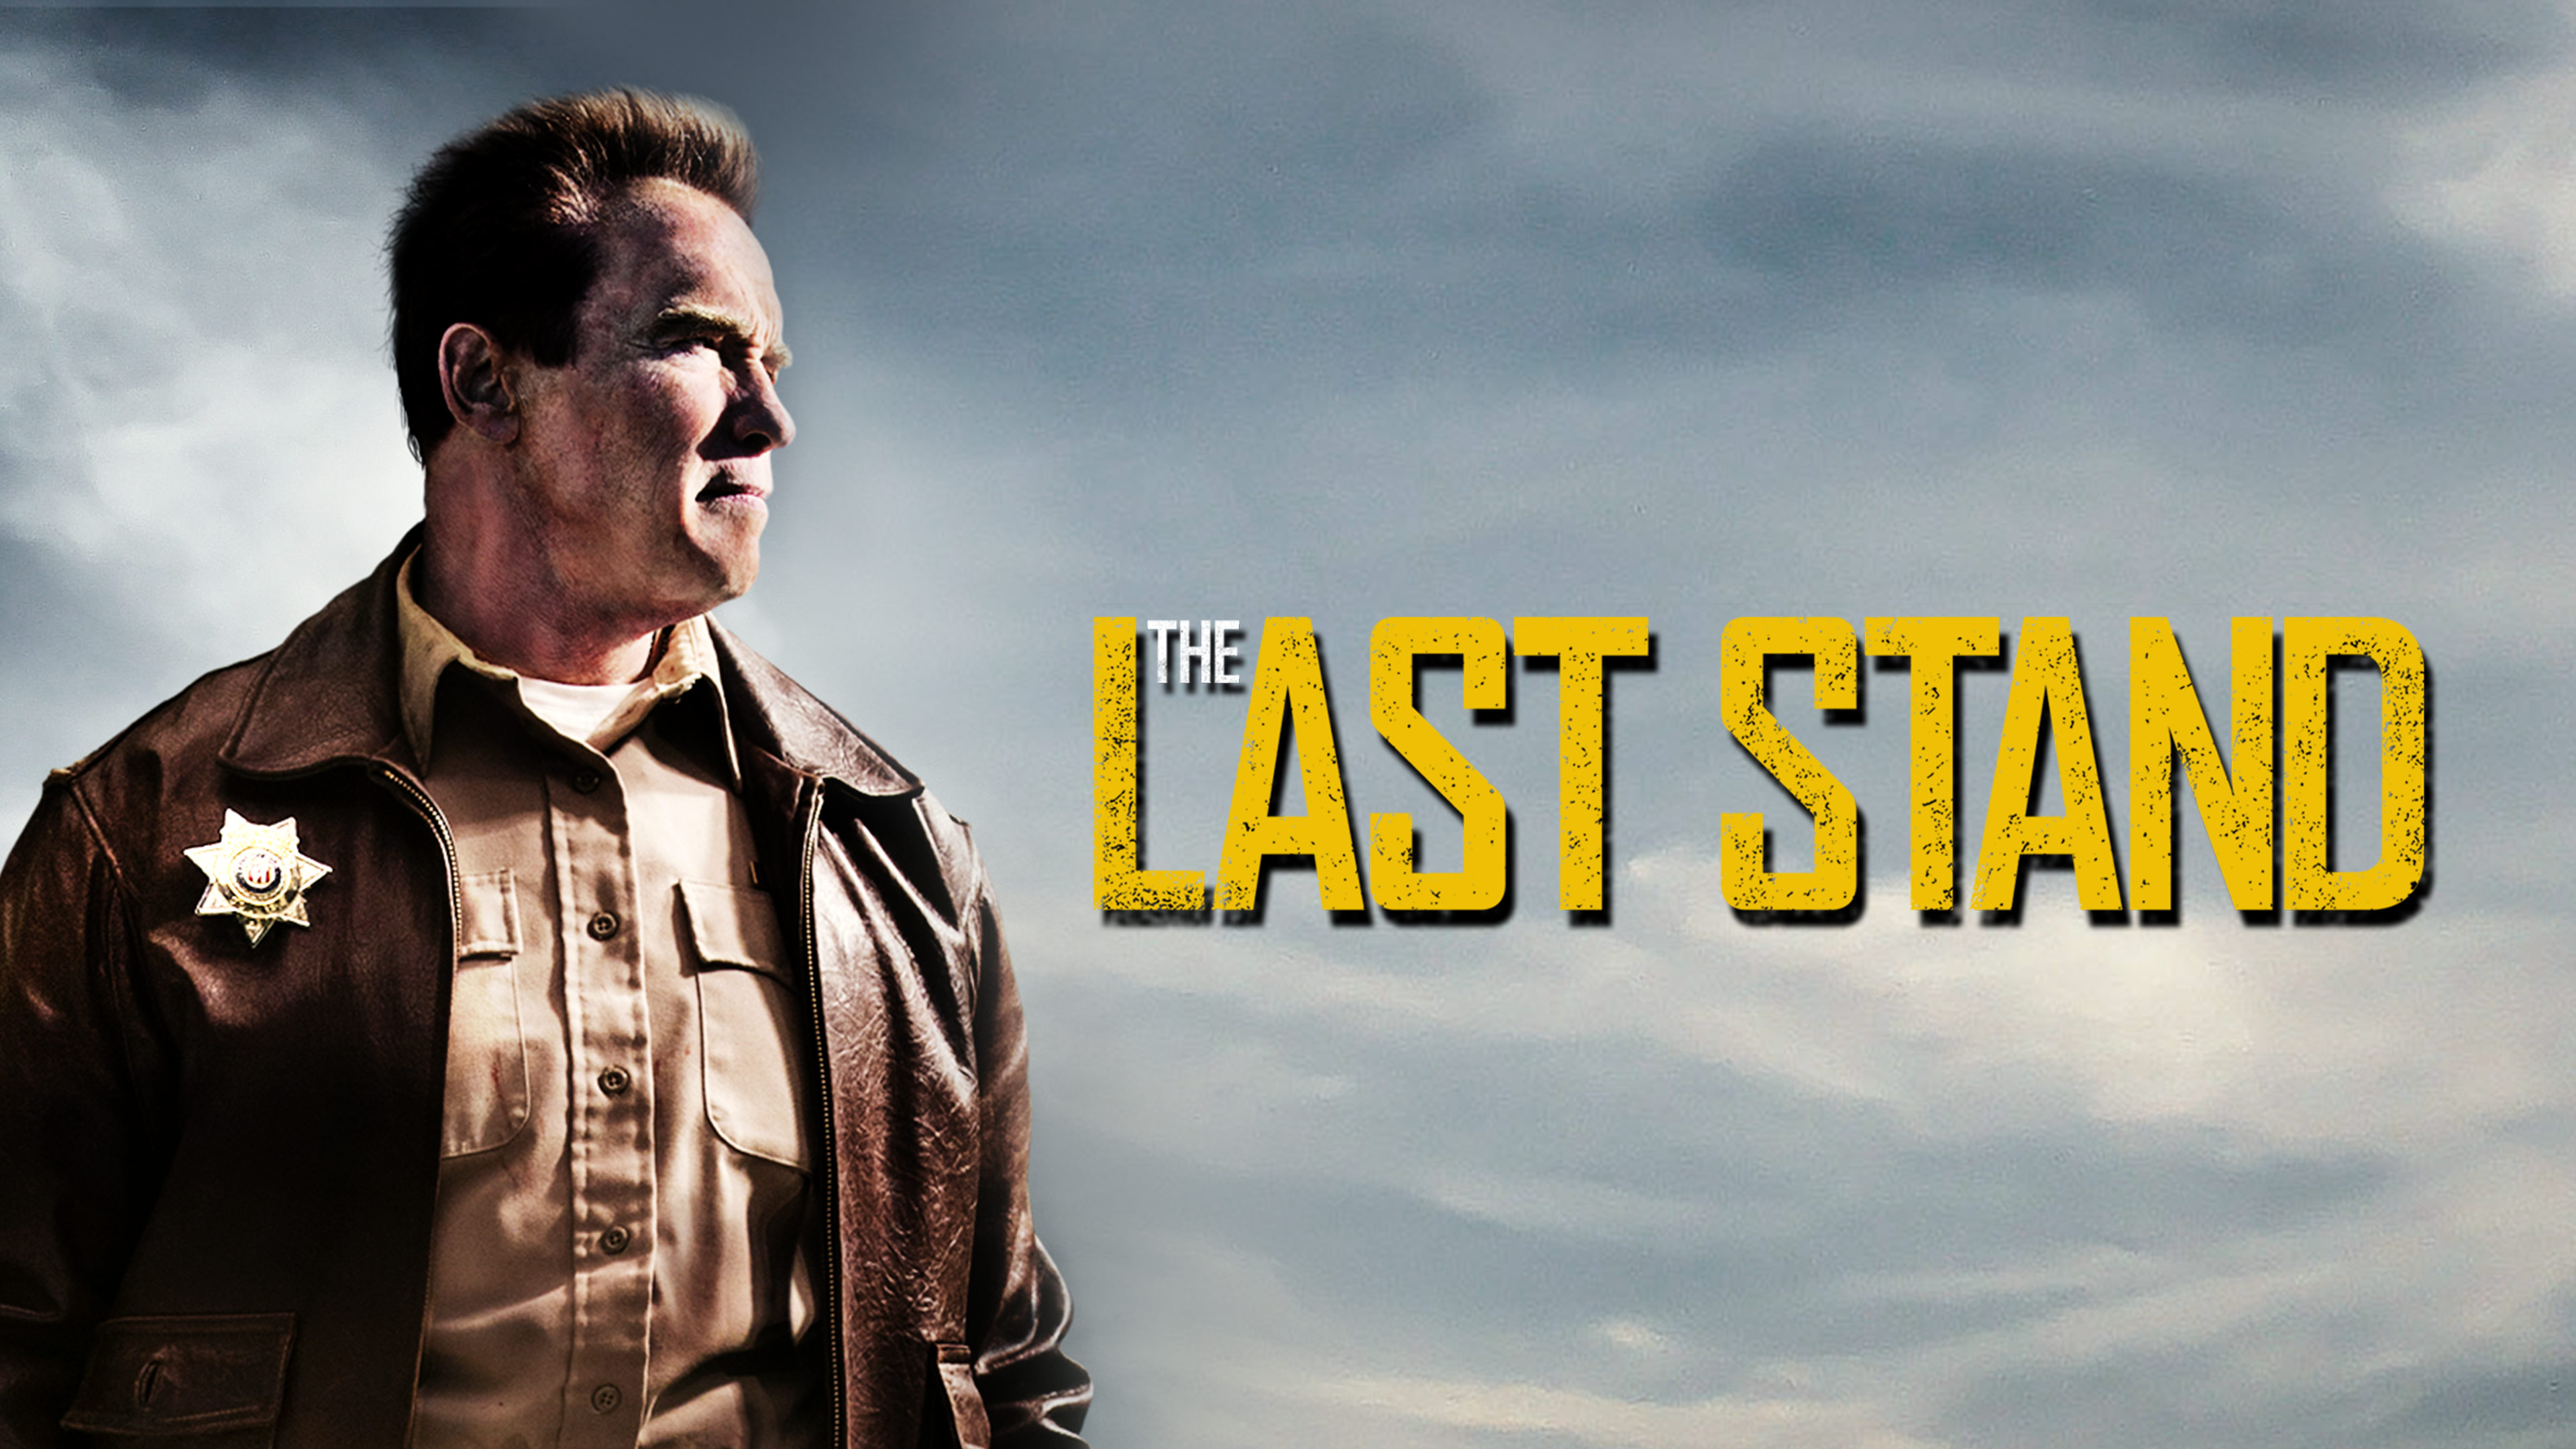 Watch The Last Stand Online | Stream Full Movies